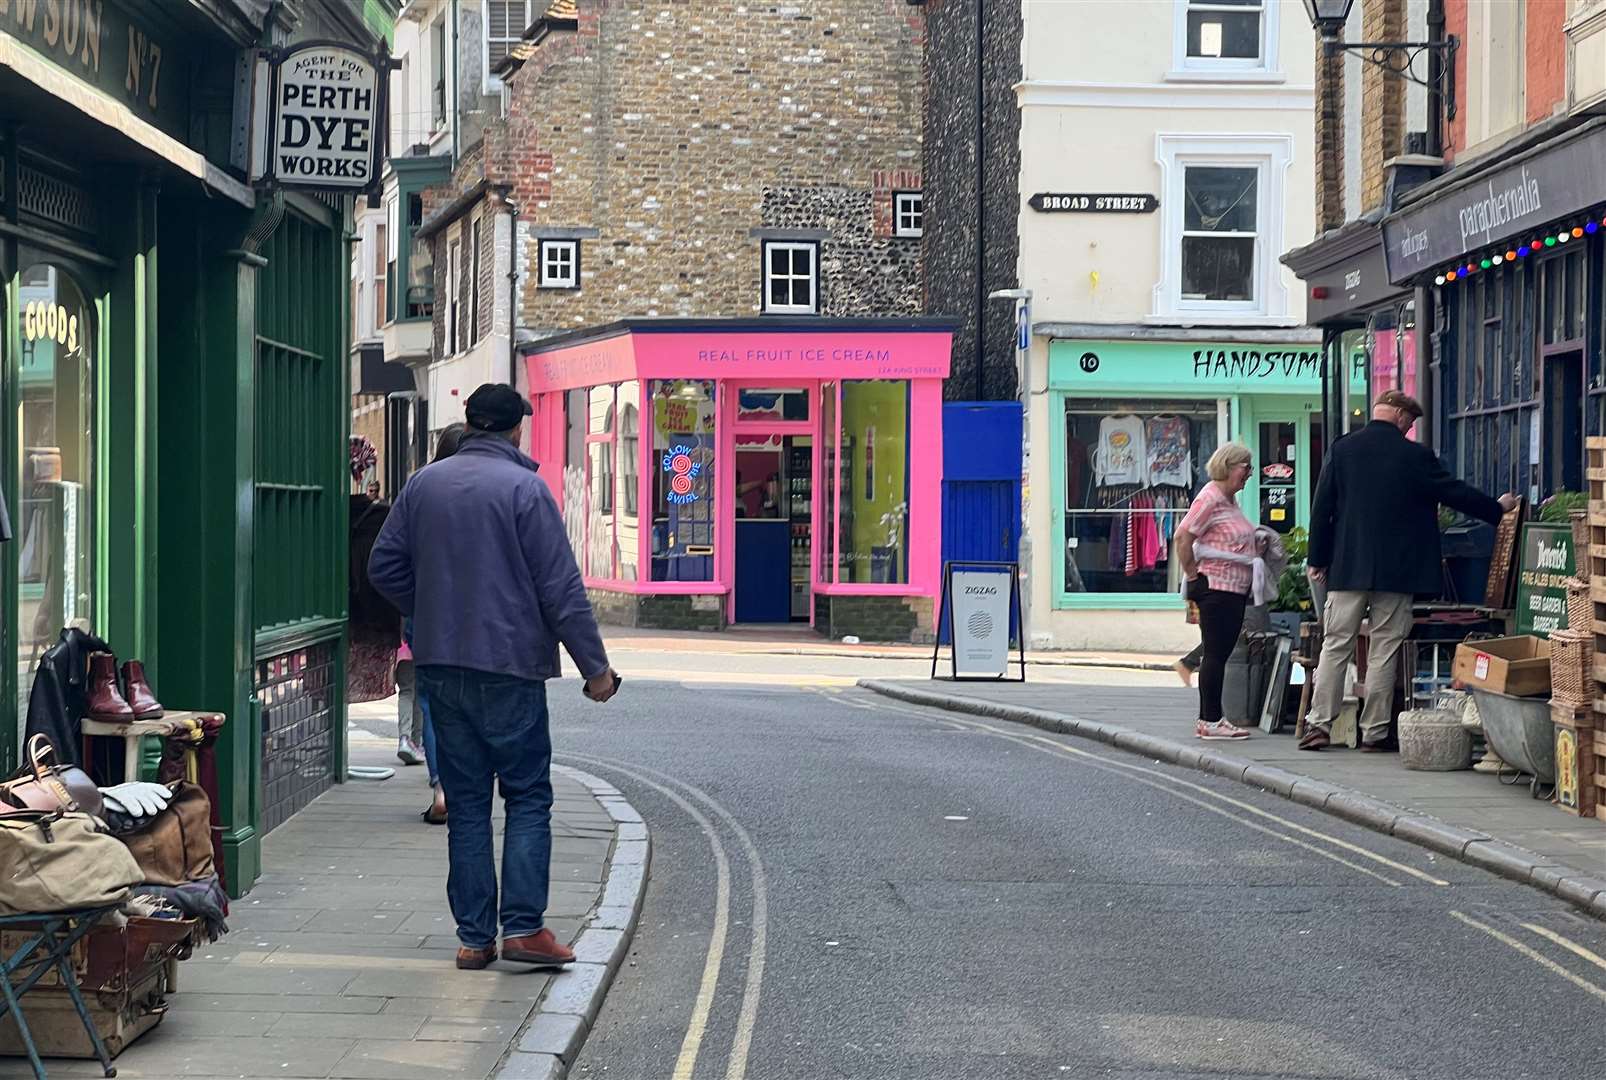 Follow My Swirl's pink building in Margate's Old Town is rather difficult to miss